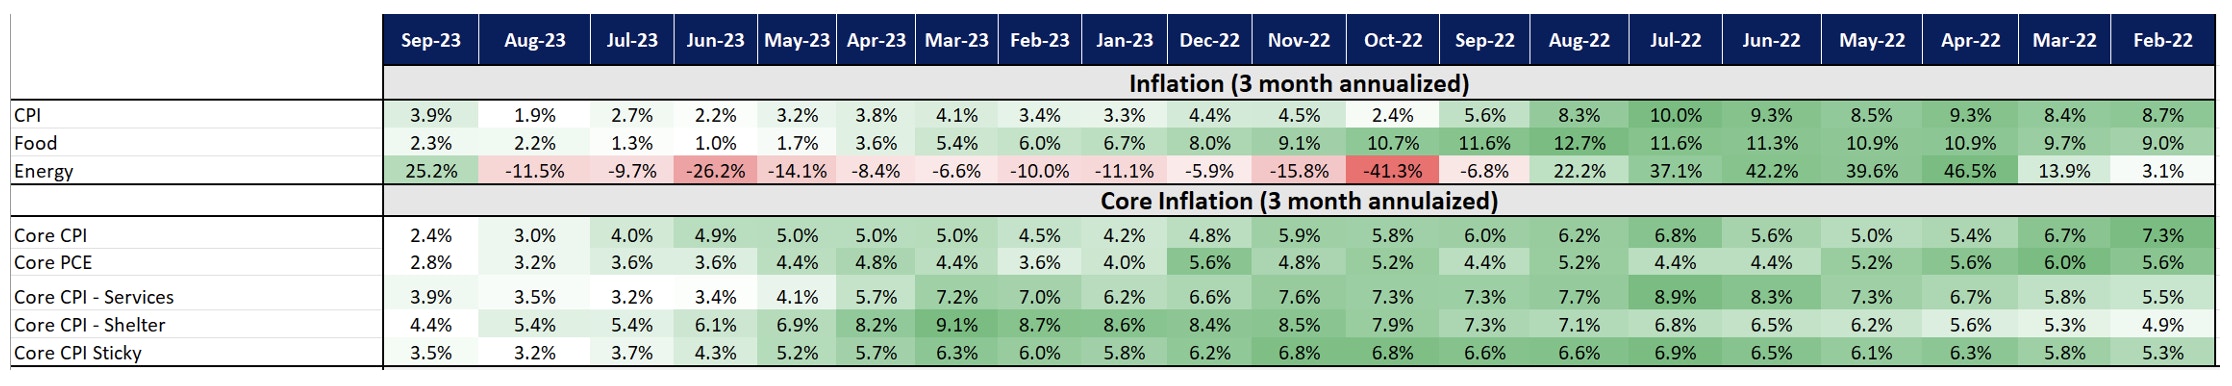 3-month annualized trend (inflation)